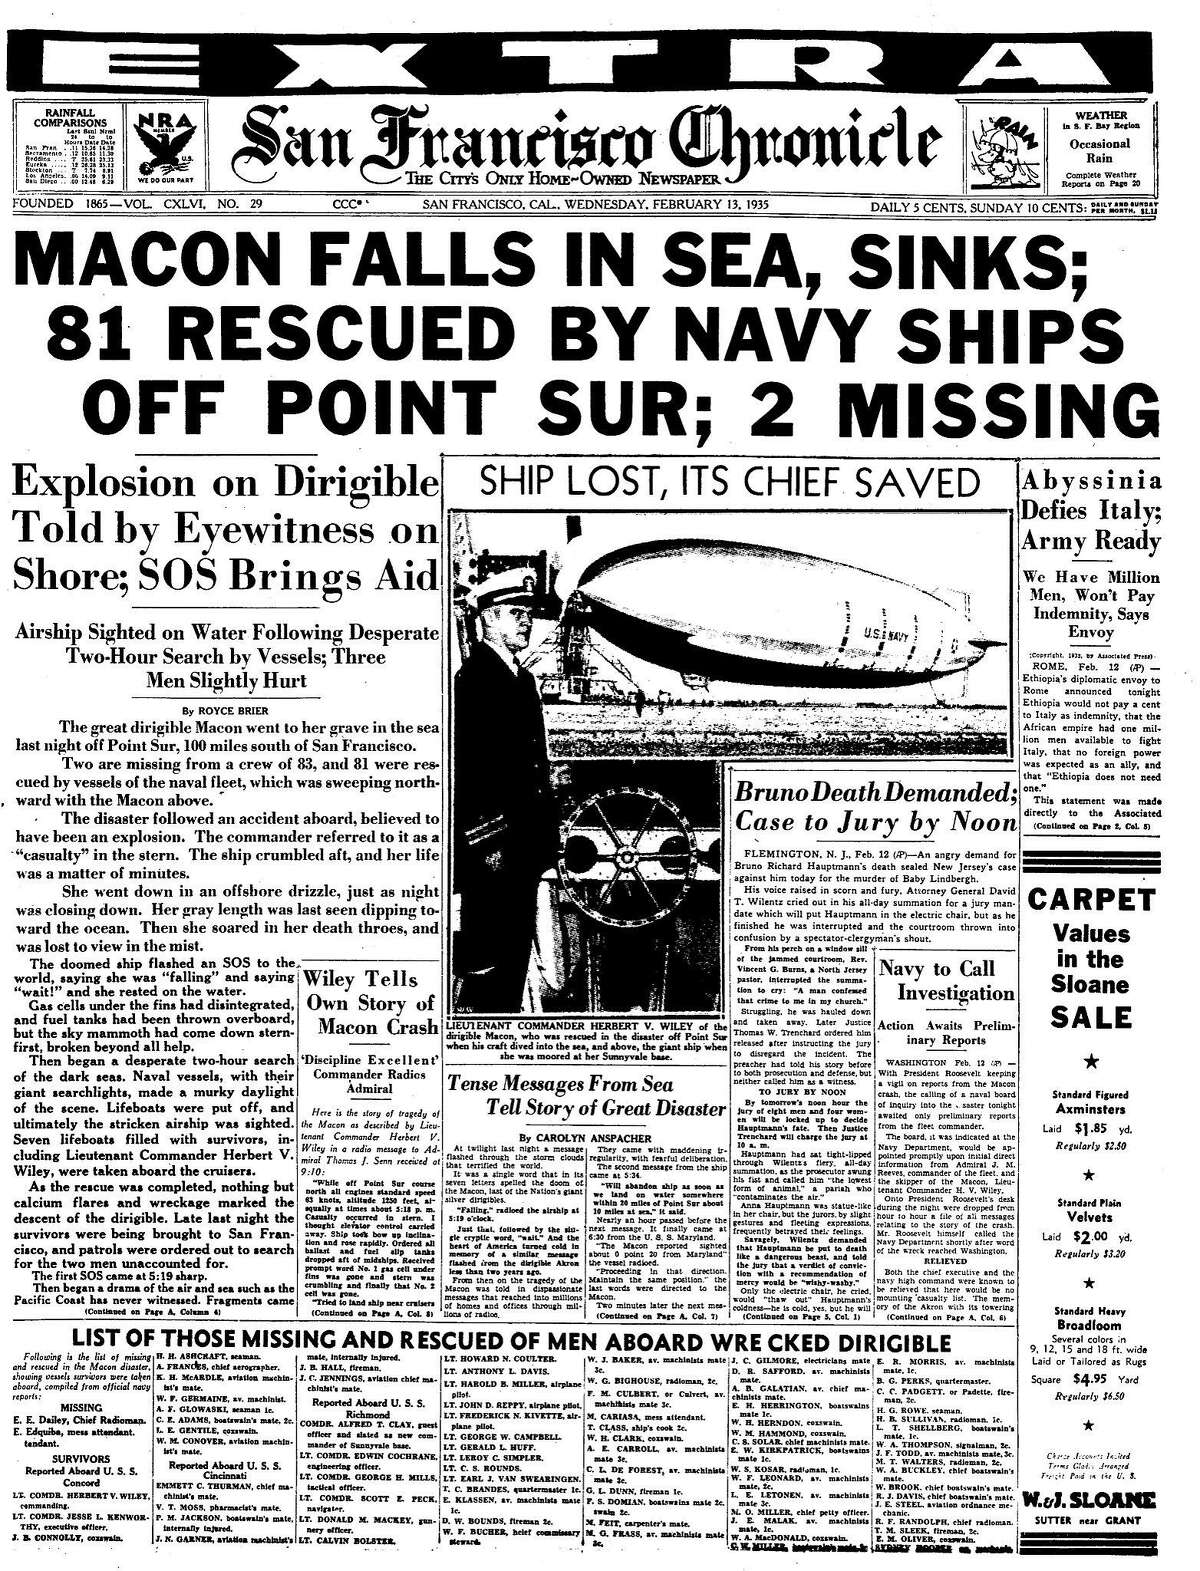 Historic Chronicle front page The Macon, a blimp falls into the Pacific Ocean .. 02/13/1935 chron365